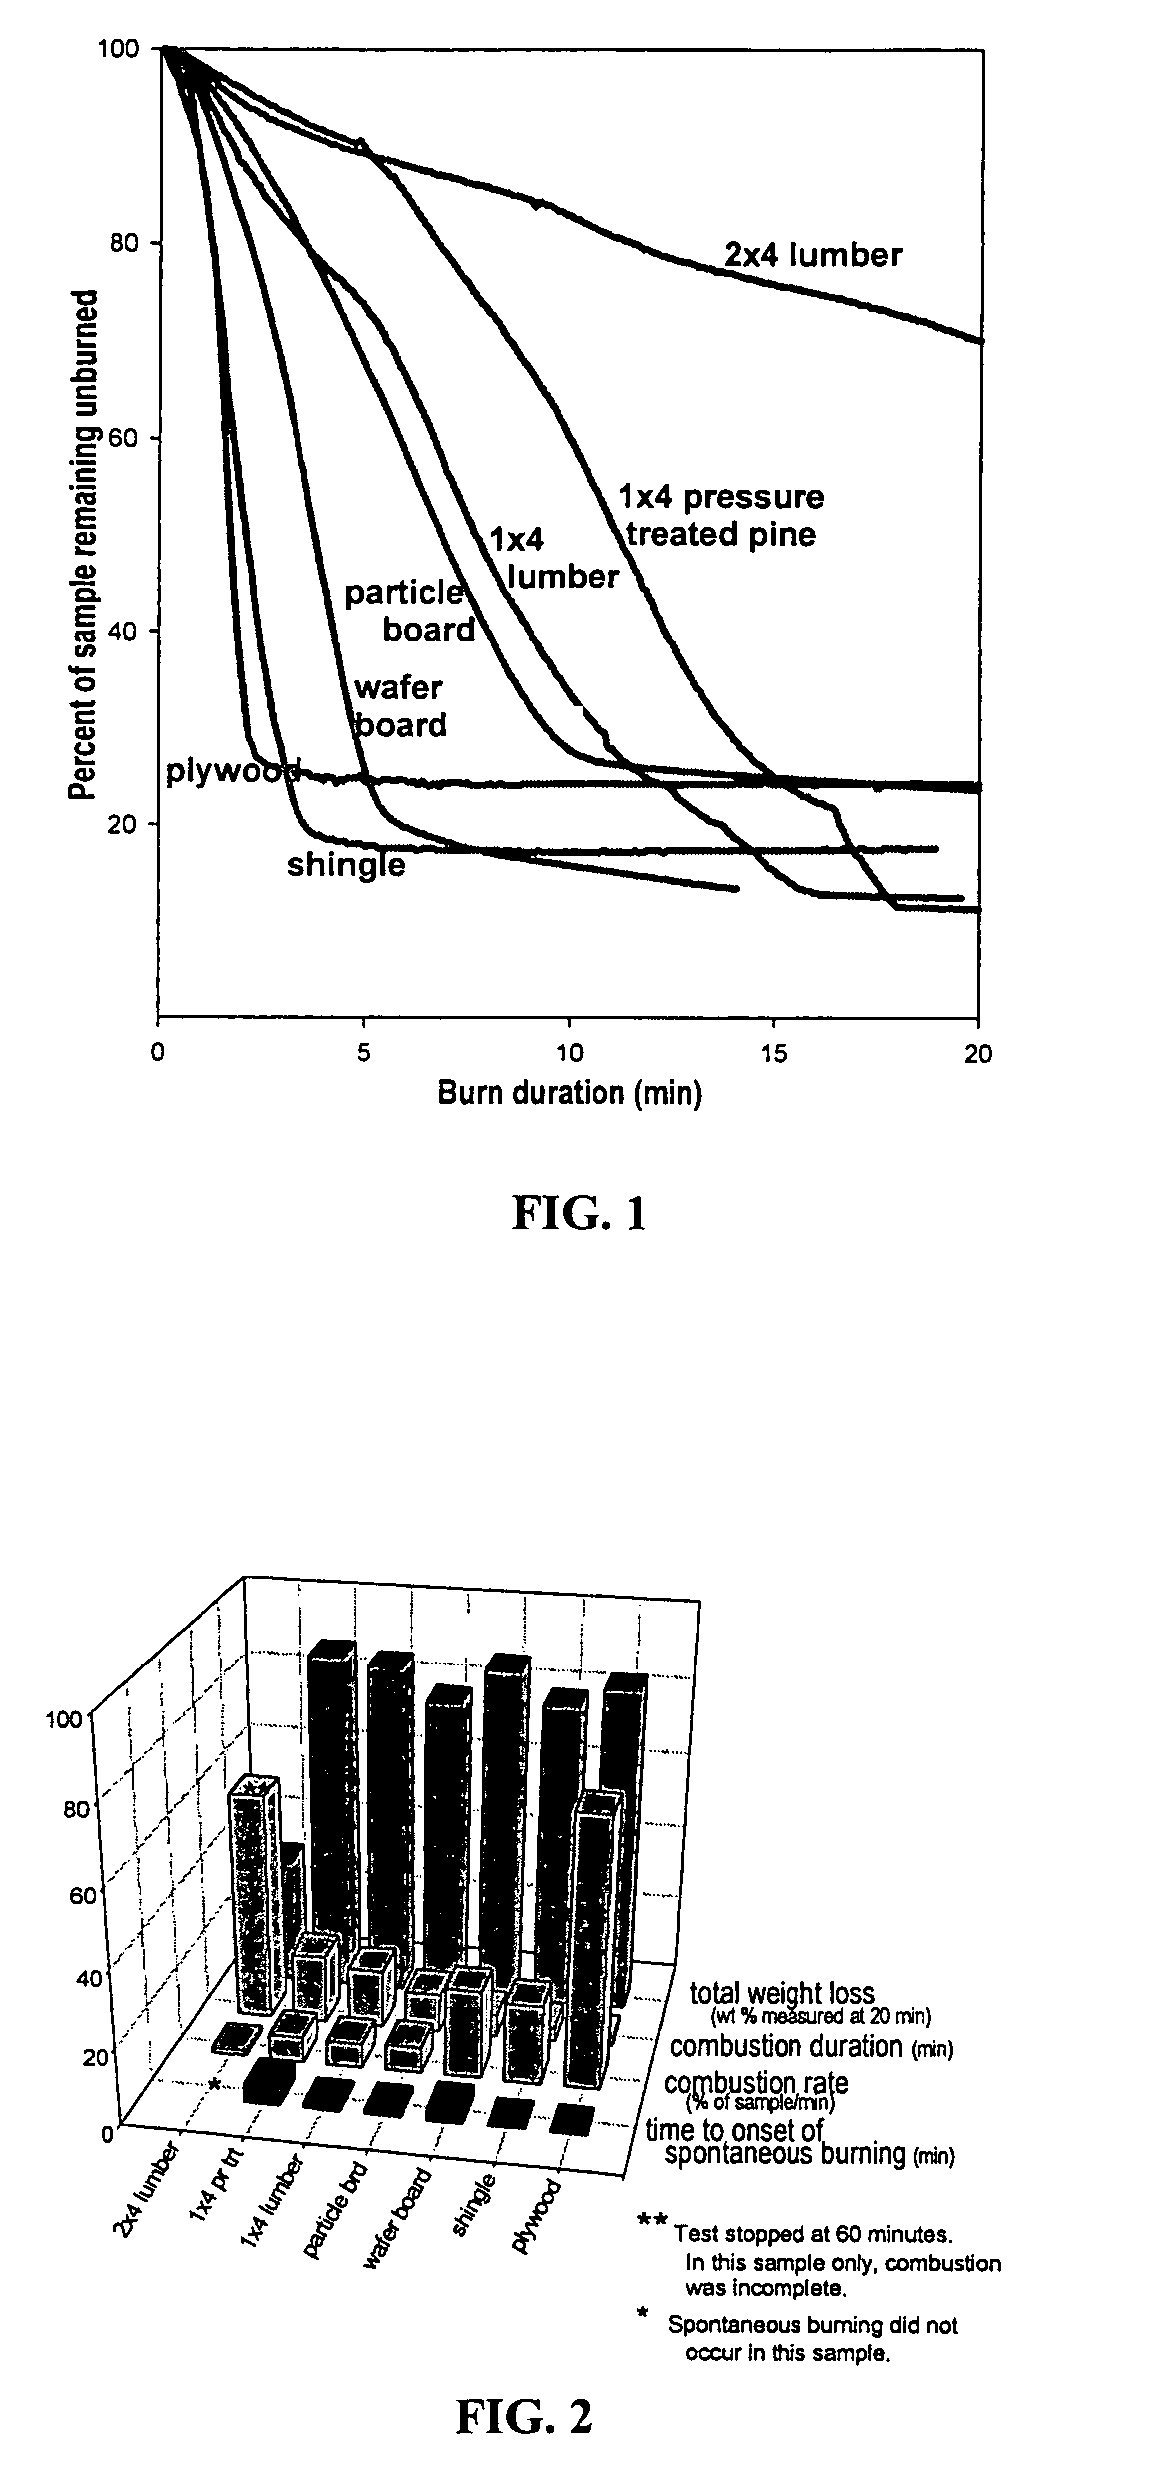 Process of using sodium silicate to create fire retardant products